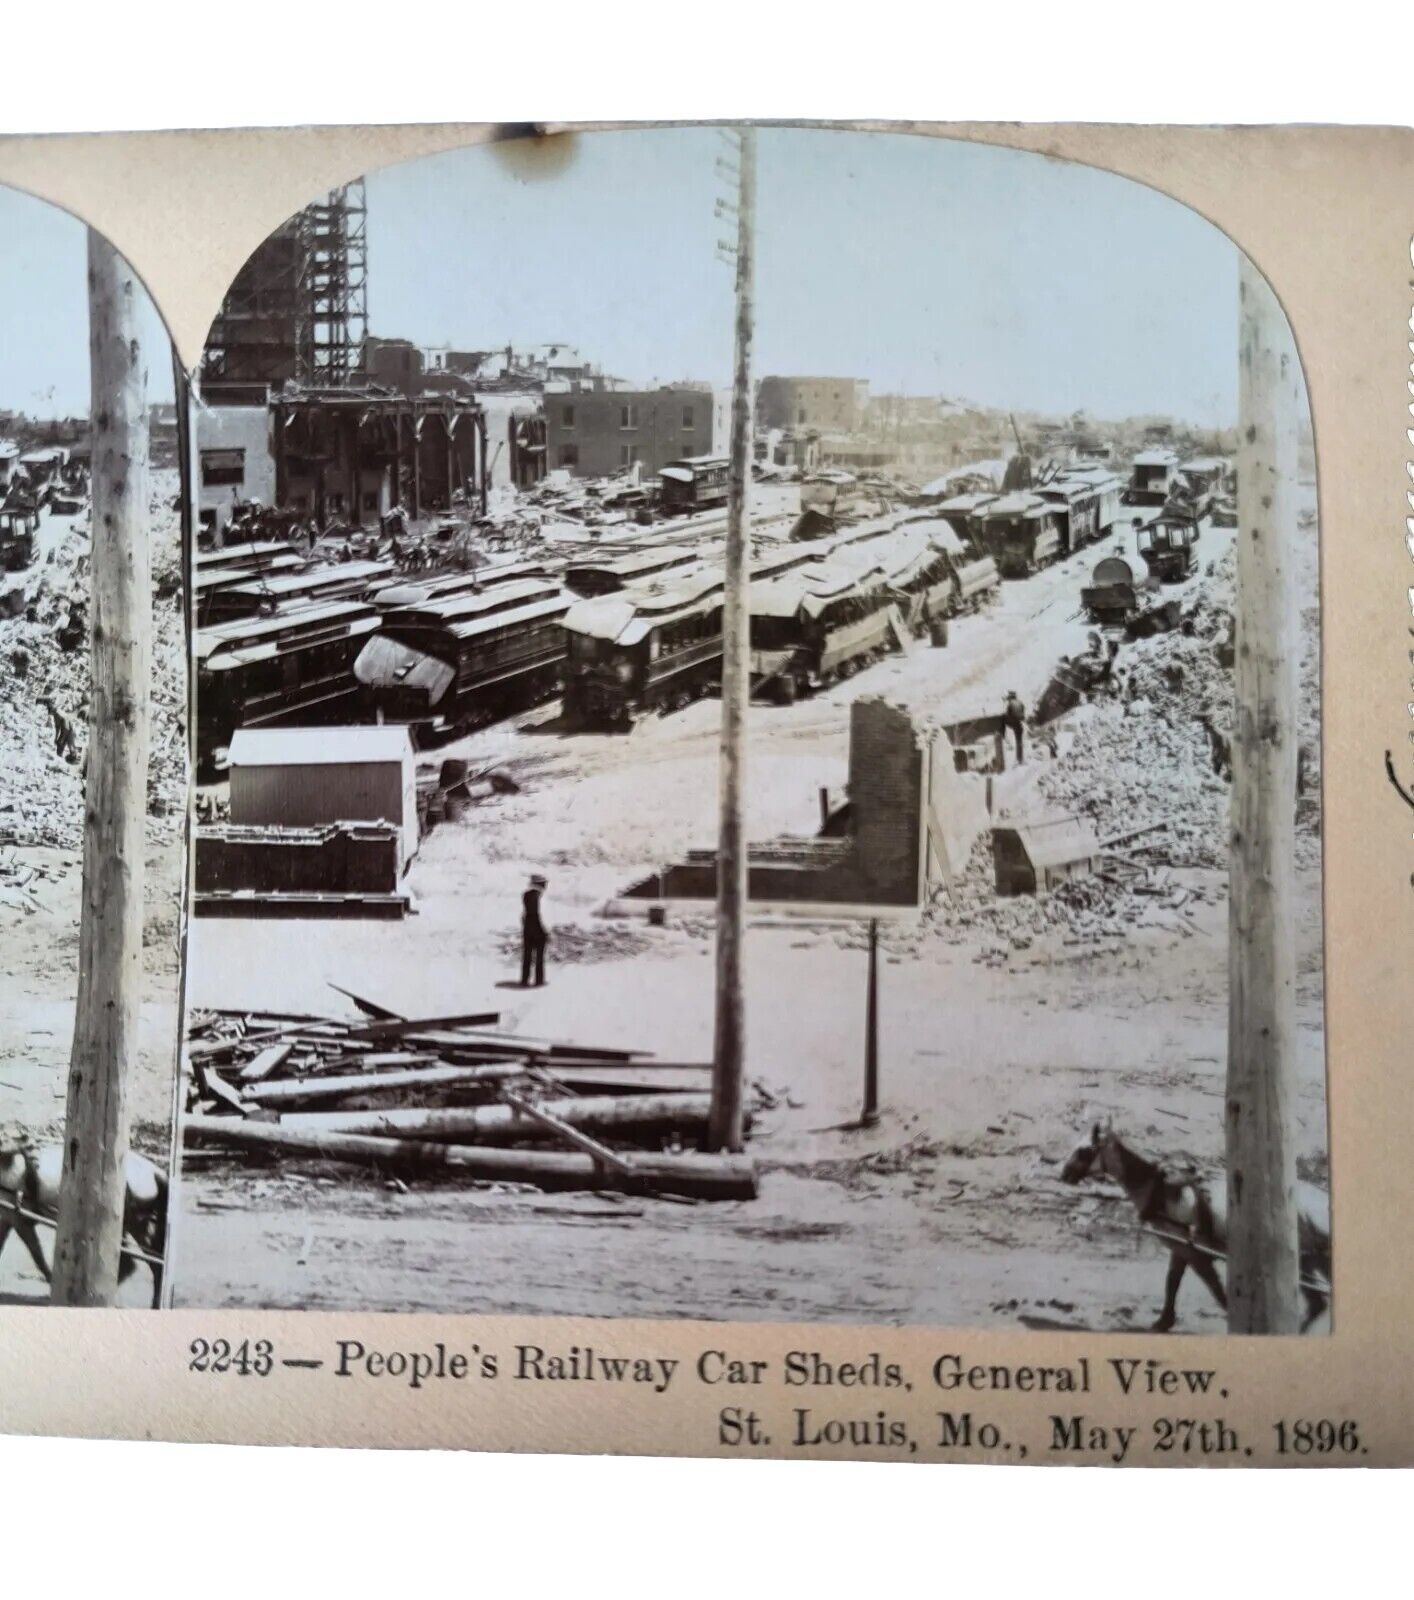 May 27th 1896 St. Louis MO Tornado Peoples Railway Car Sheds Stereoview L1